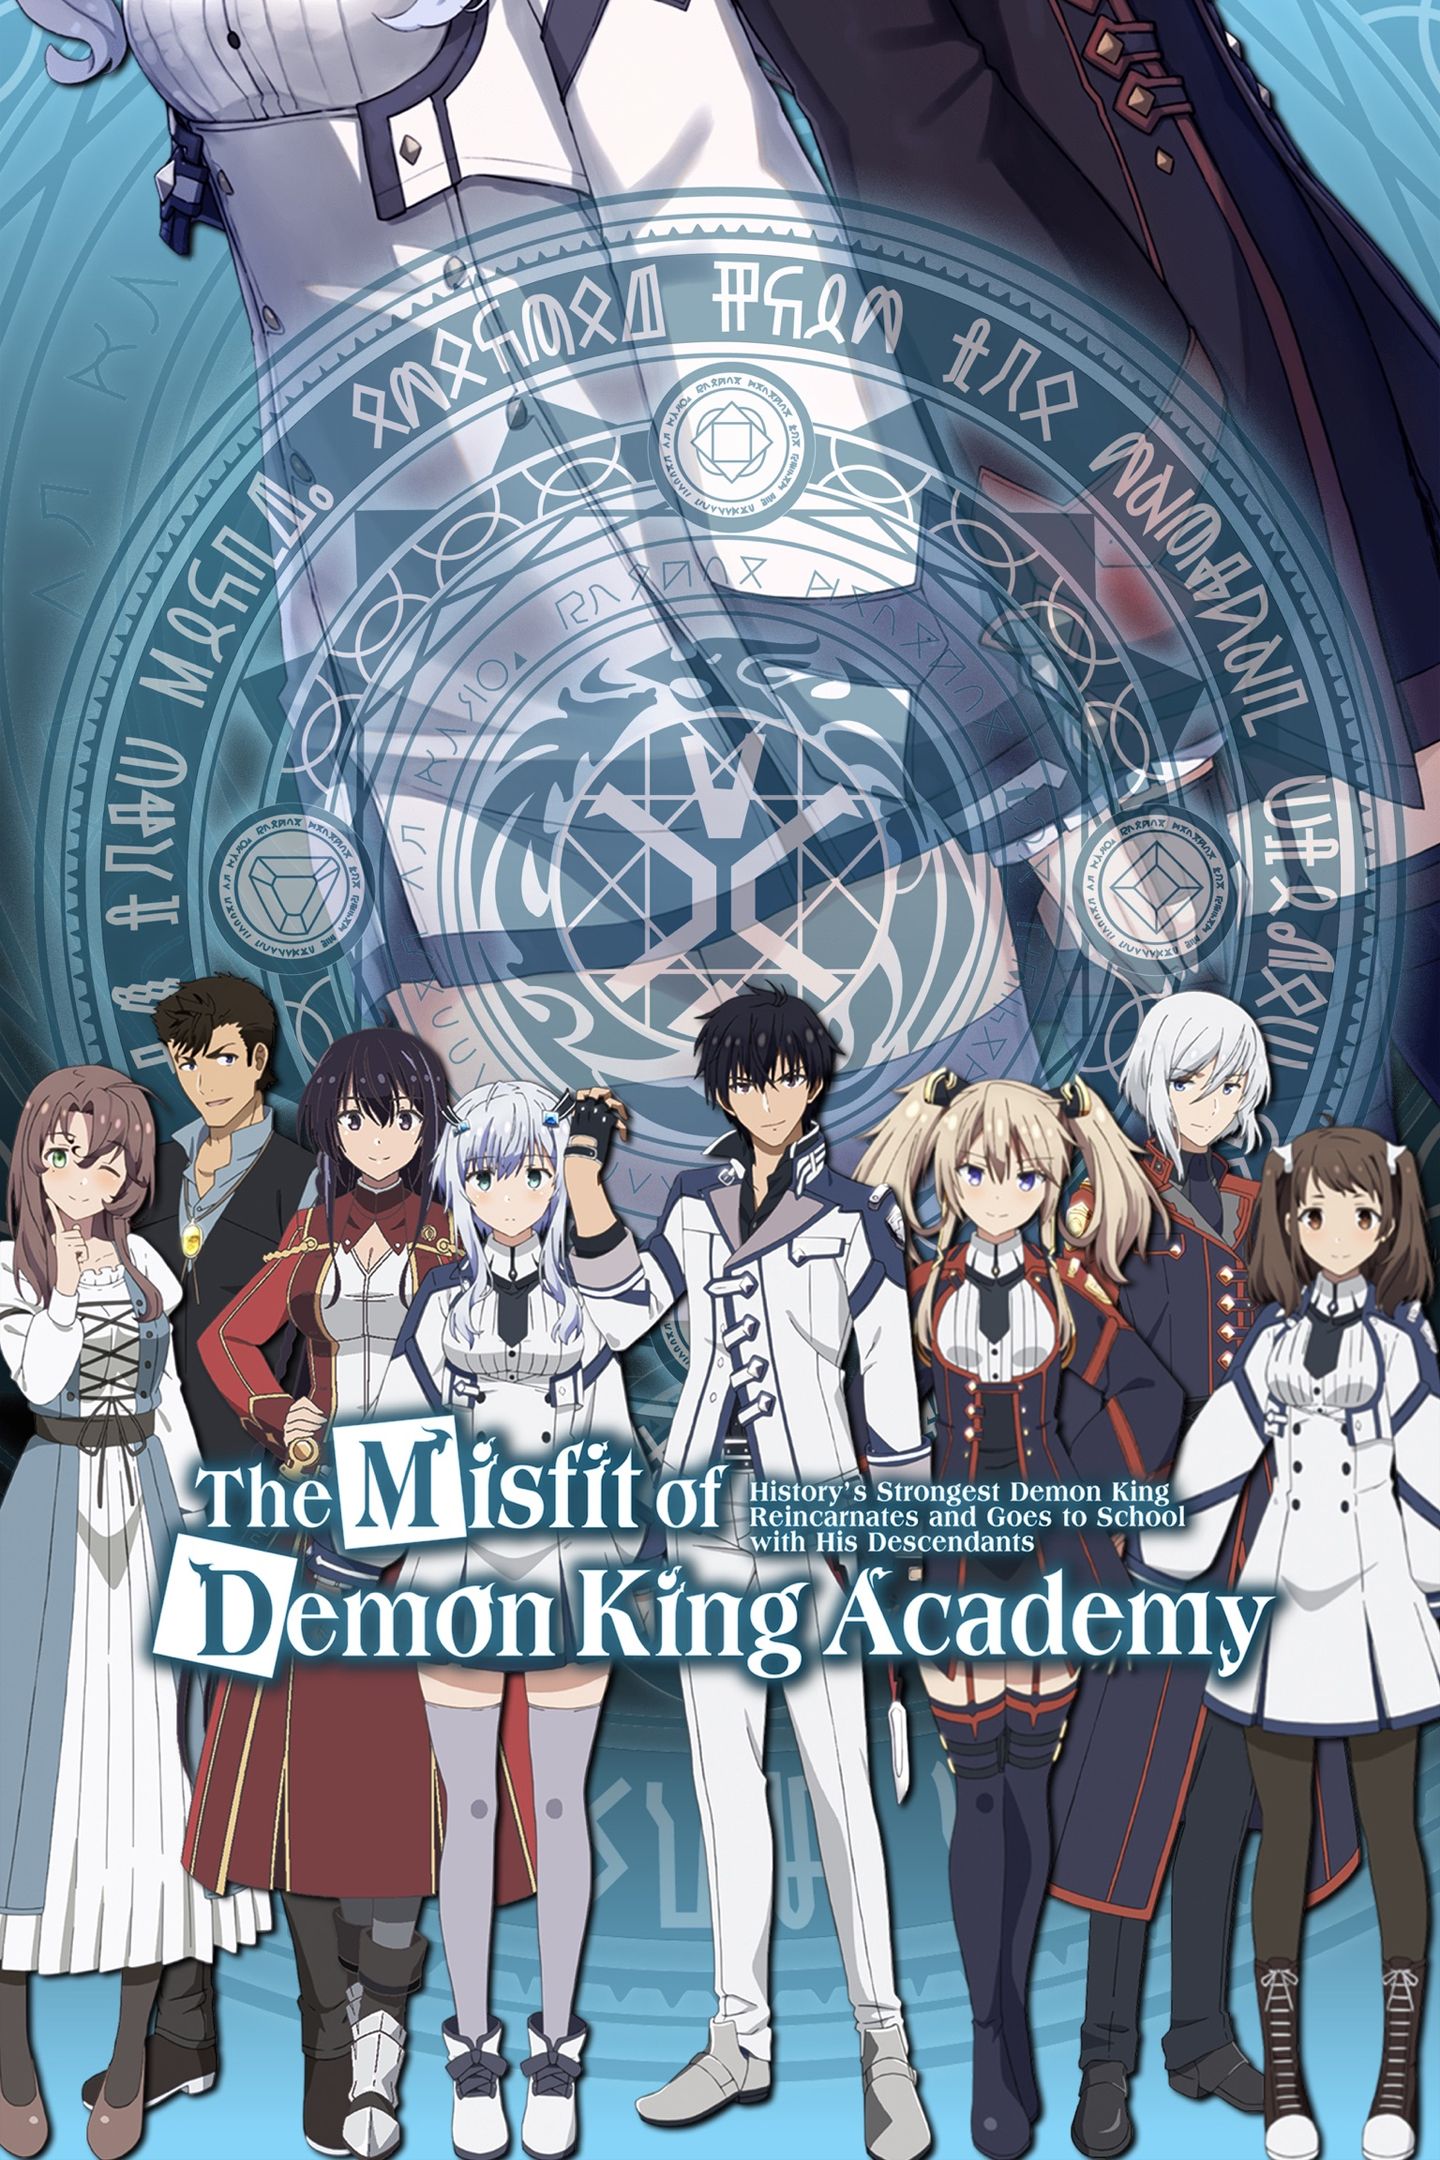 The Misfit of Demon King Academy anime